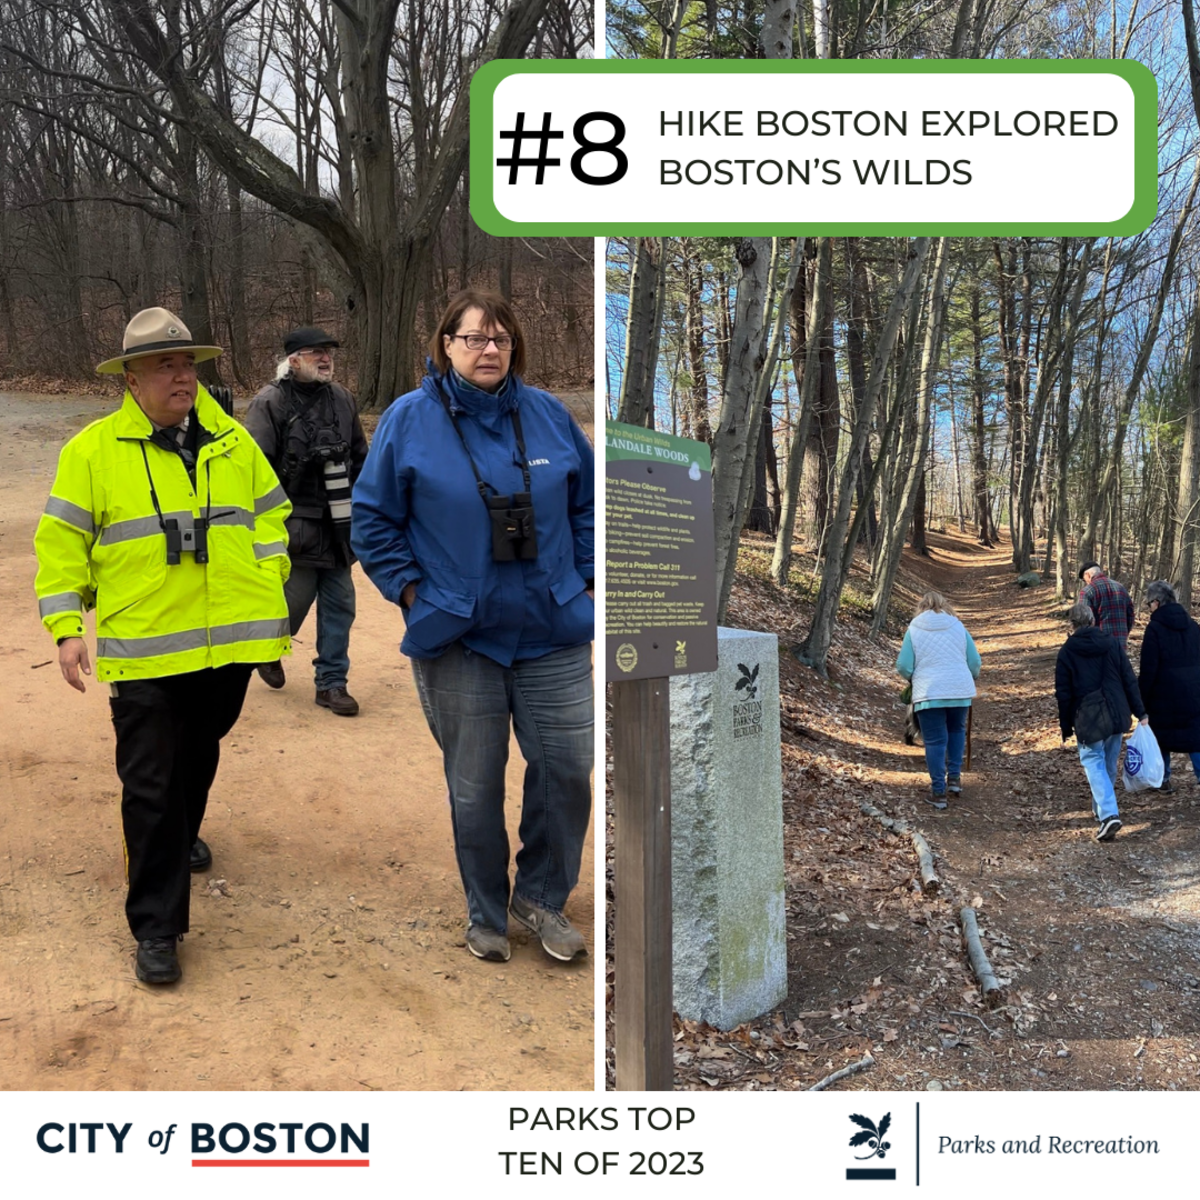 8. HIKE BOSTON EXPLORED BOSTON’S WILDS. - People hiking in the woods, park ranger walking with people.